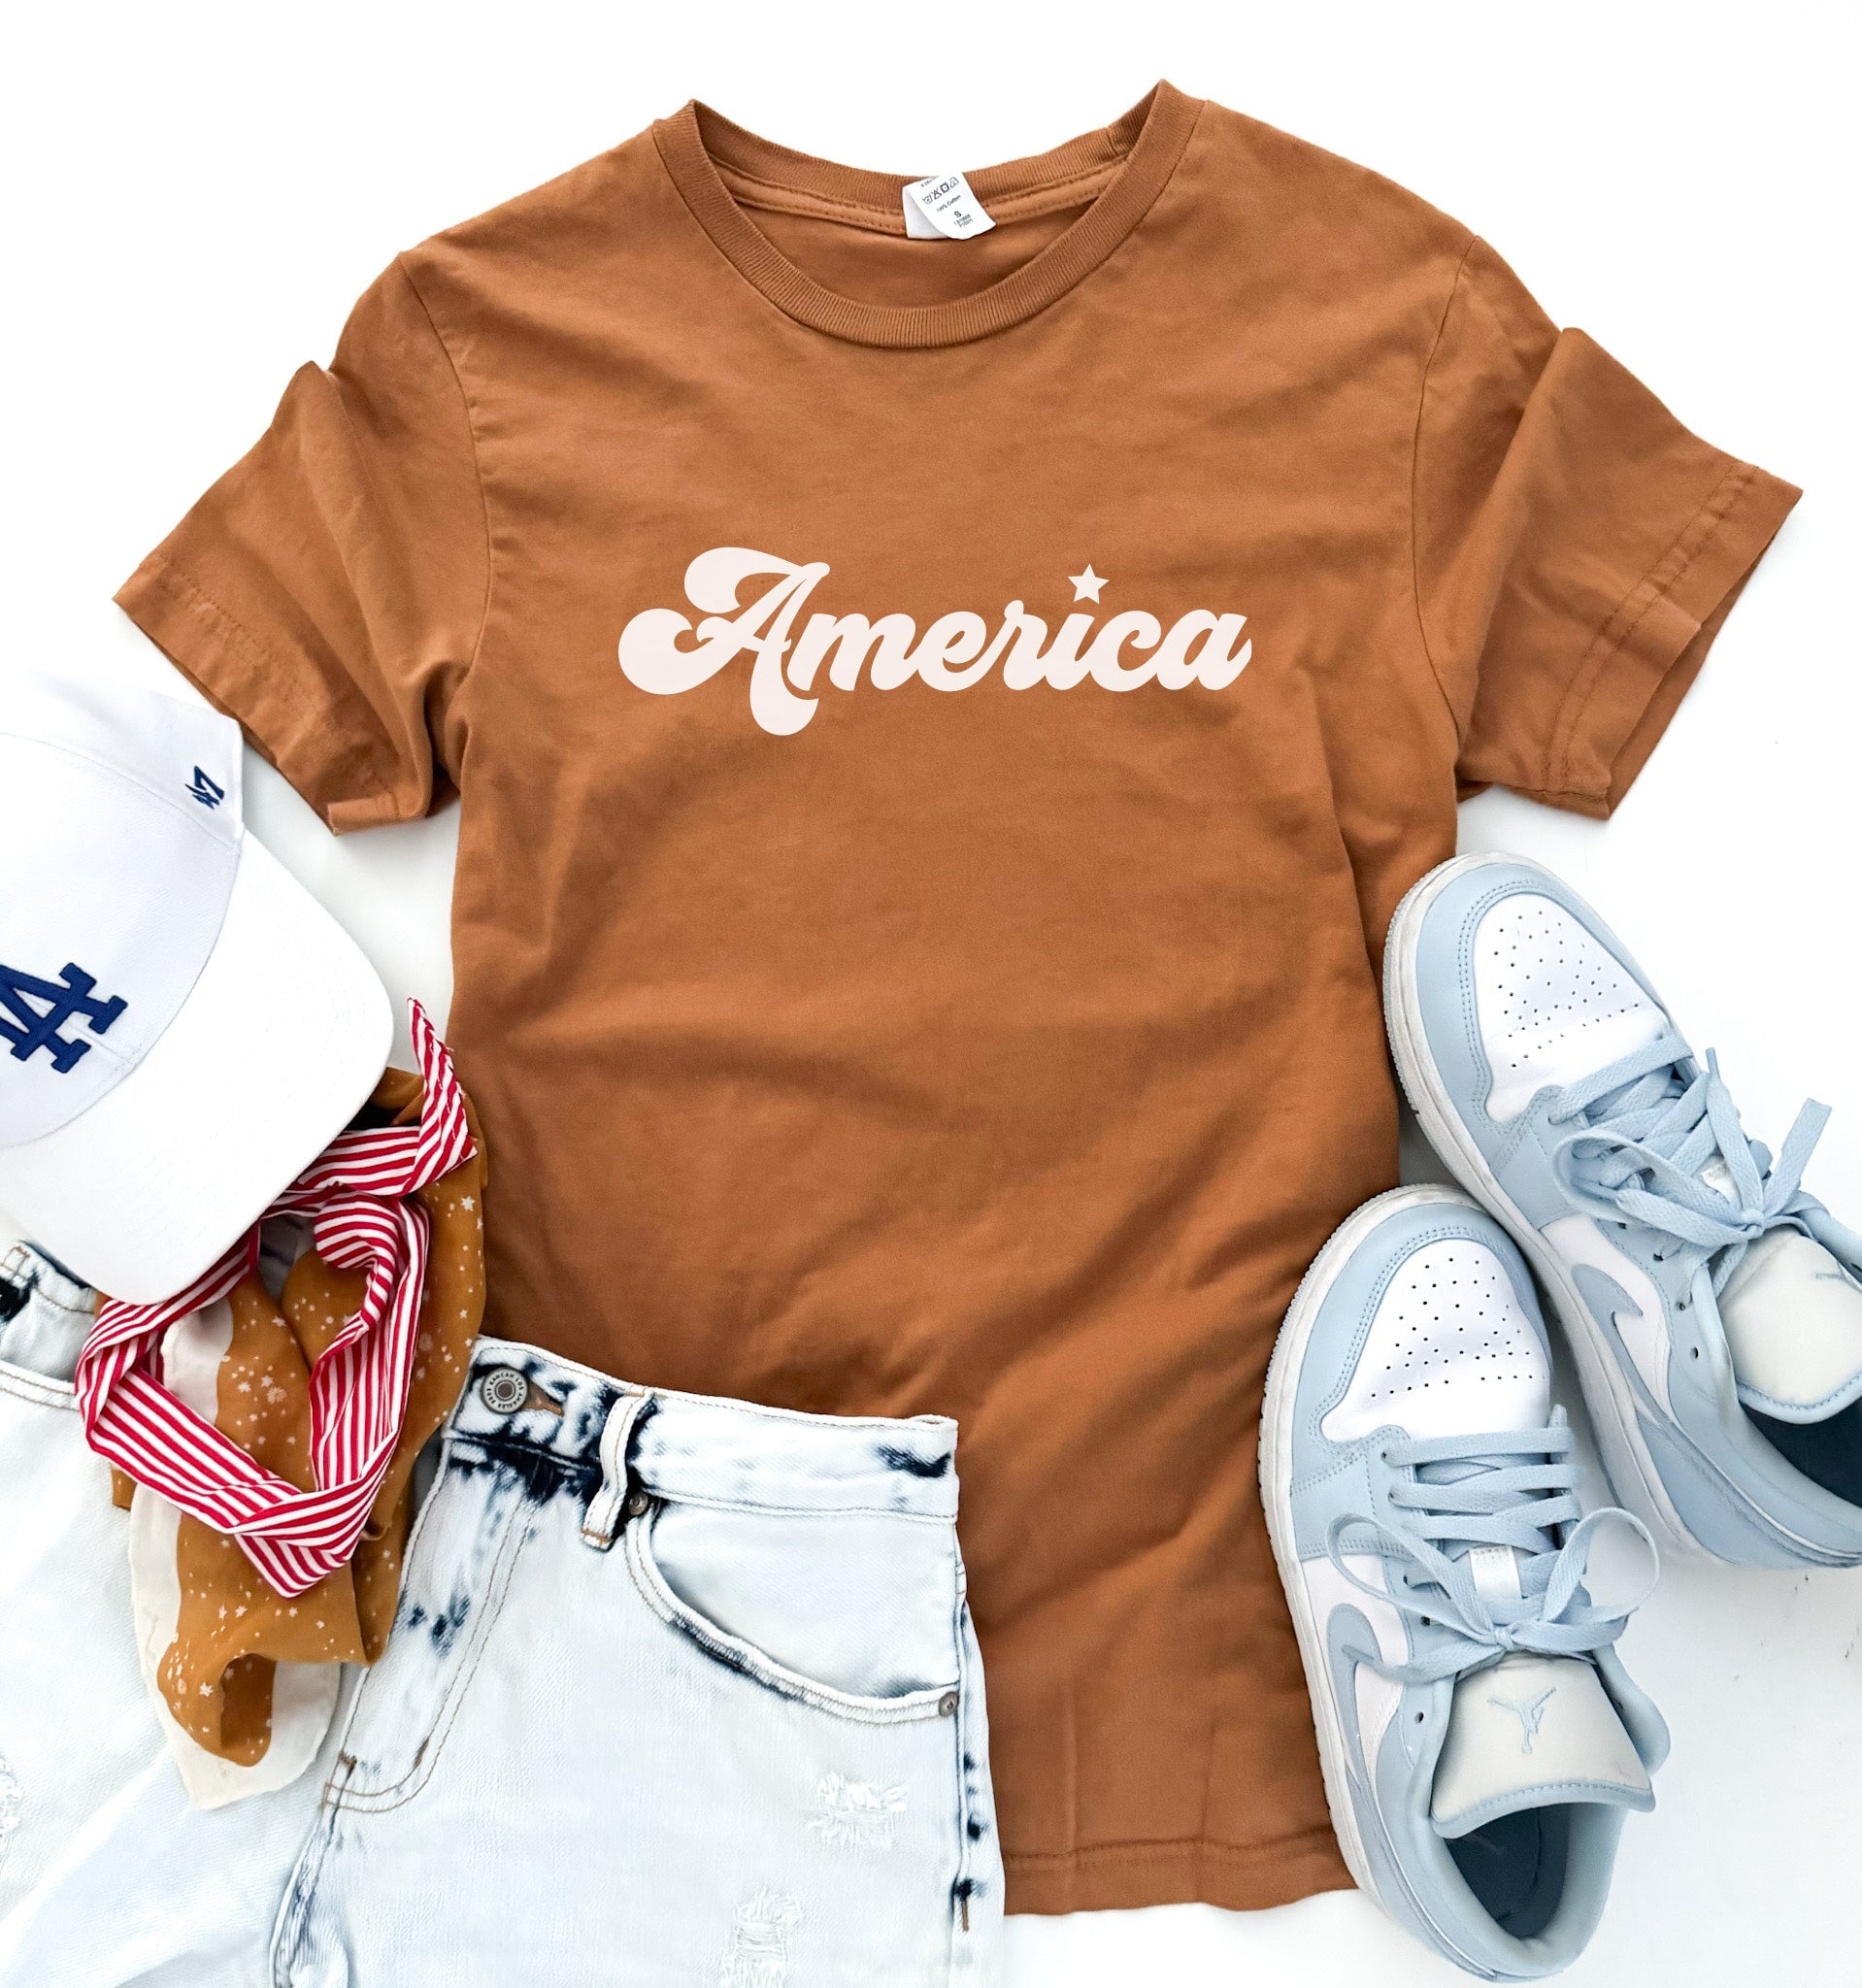 America script tee 4th of july collection Bella Canvas 3001 